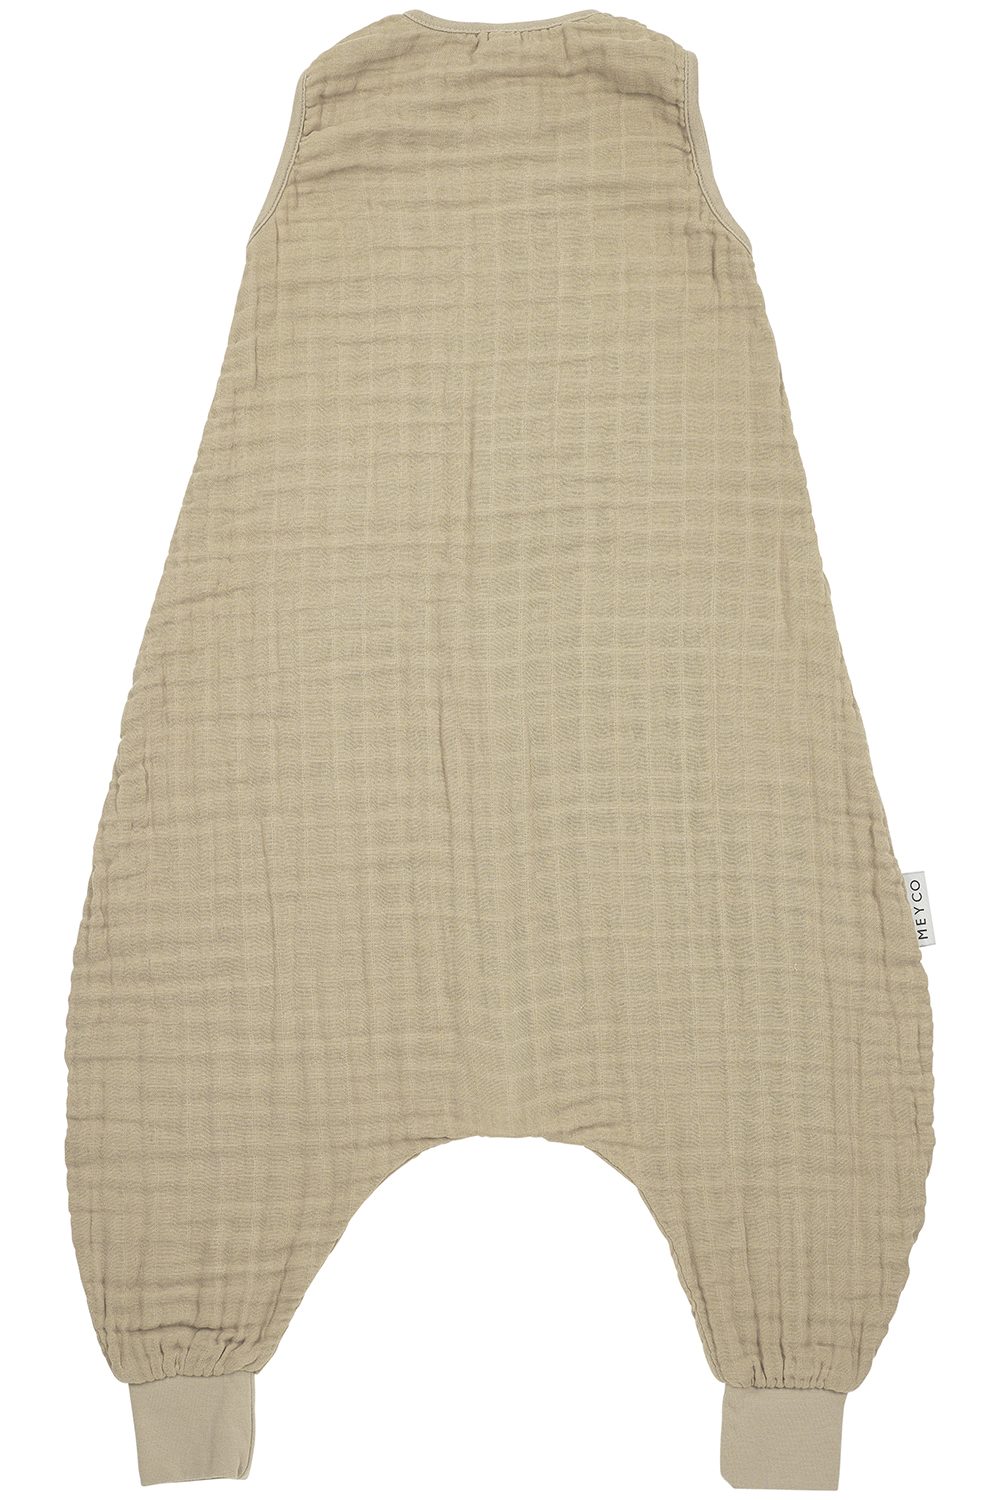 Baby sommer Schlafoverall Jumper pre-washed musselin Uni - sand - 80cm